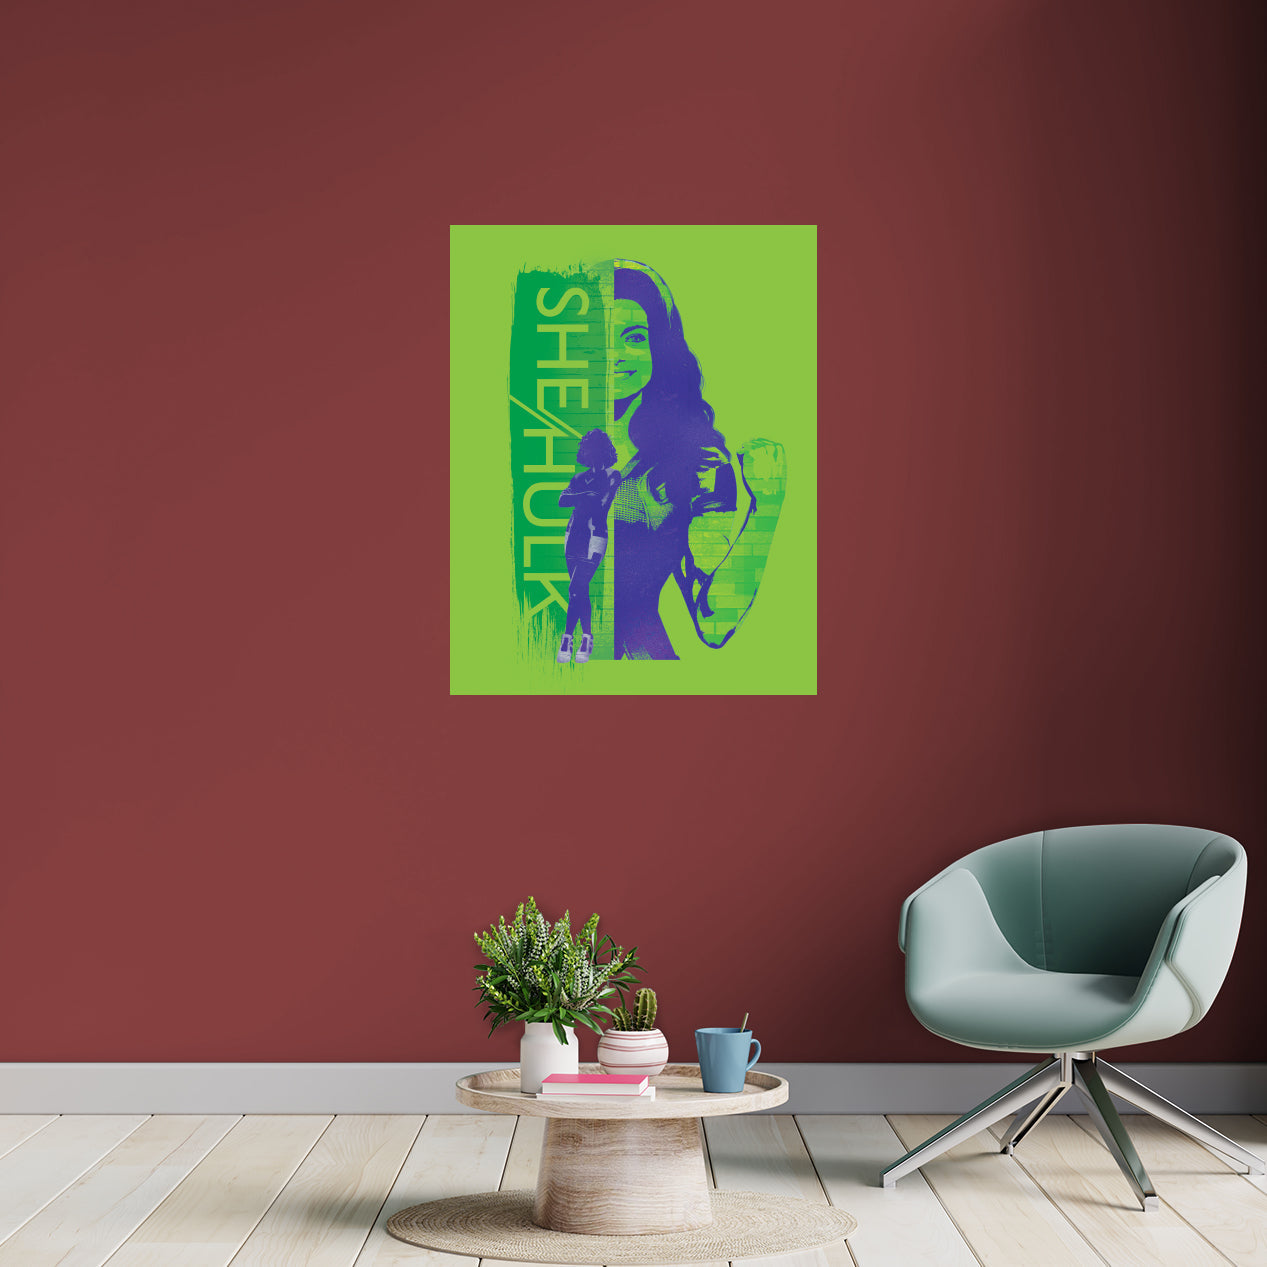 She-Hulk: She-Hulk Duotone Painted Brick Mural - Officially Licensed Marvel Removable Adhesive Decal